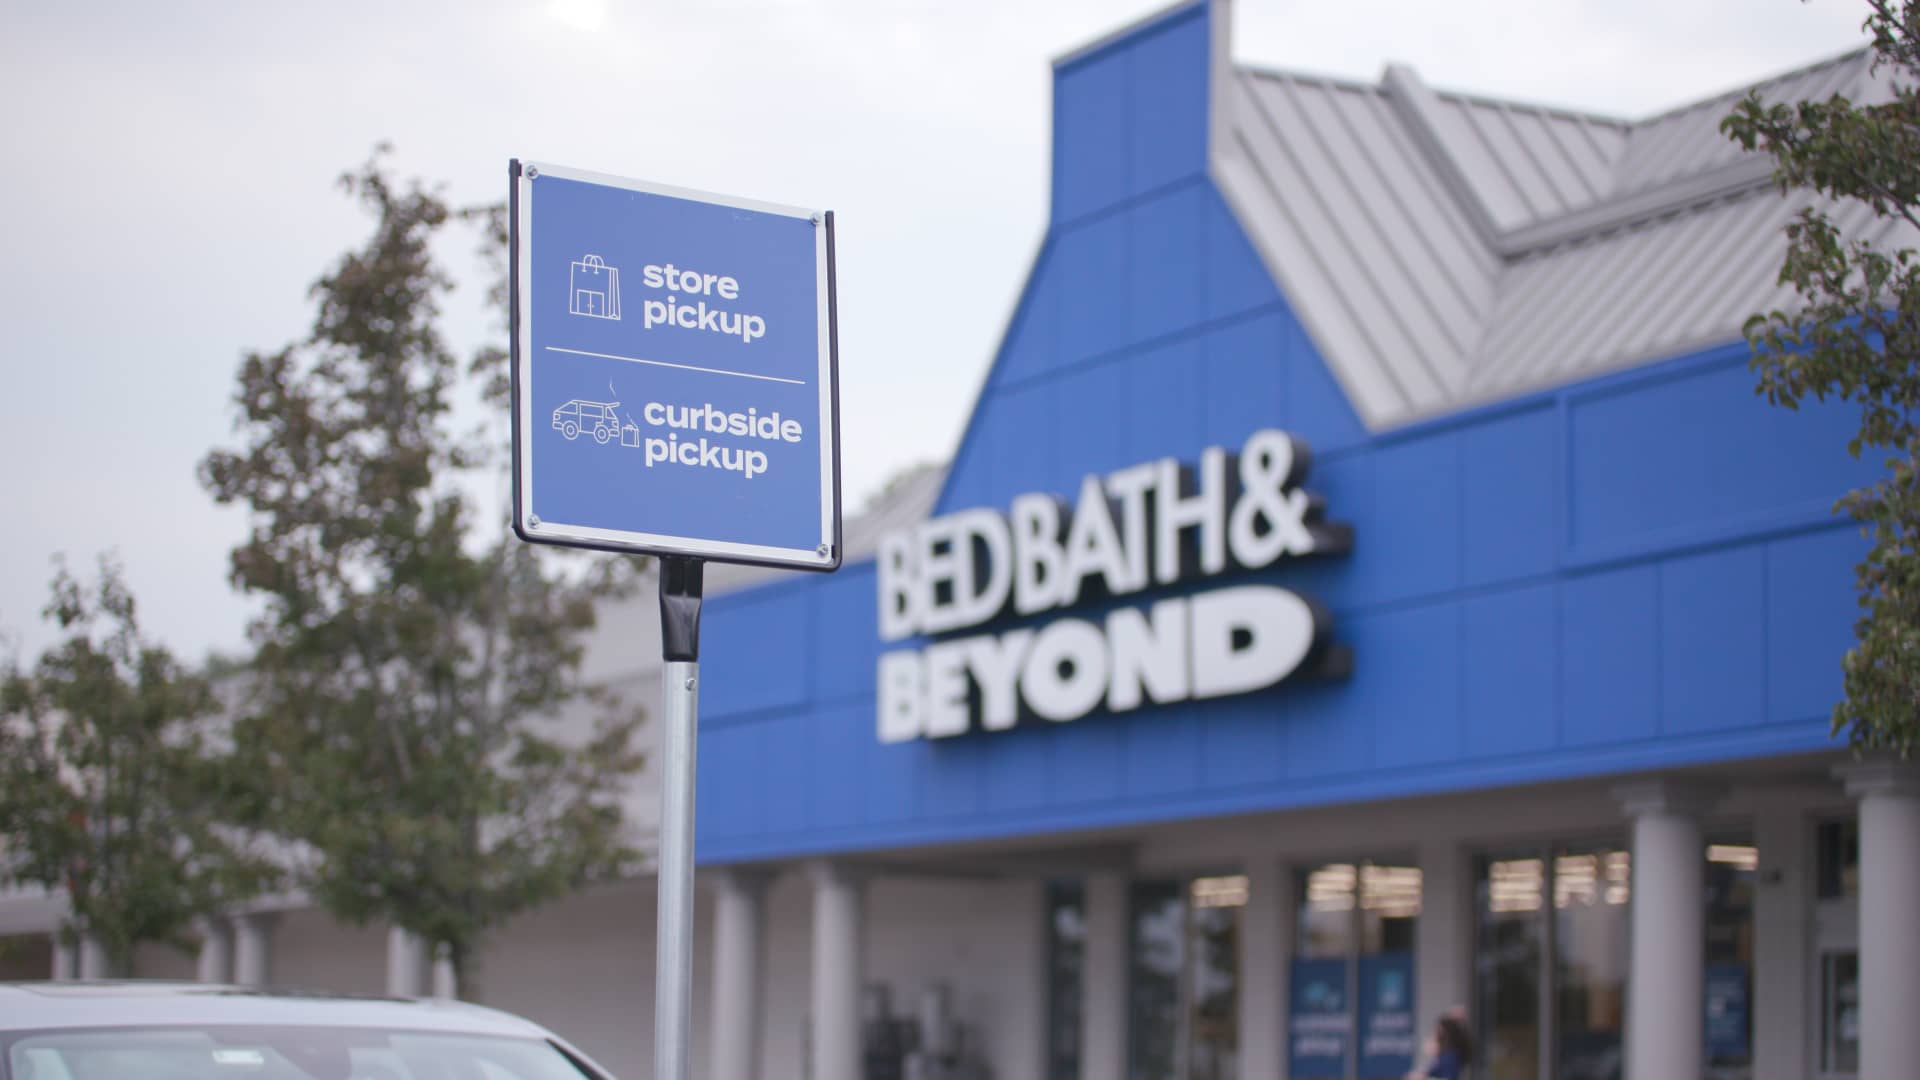 Bed Bath & Beyond (BBBY) Q4 2020 earnings